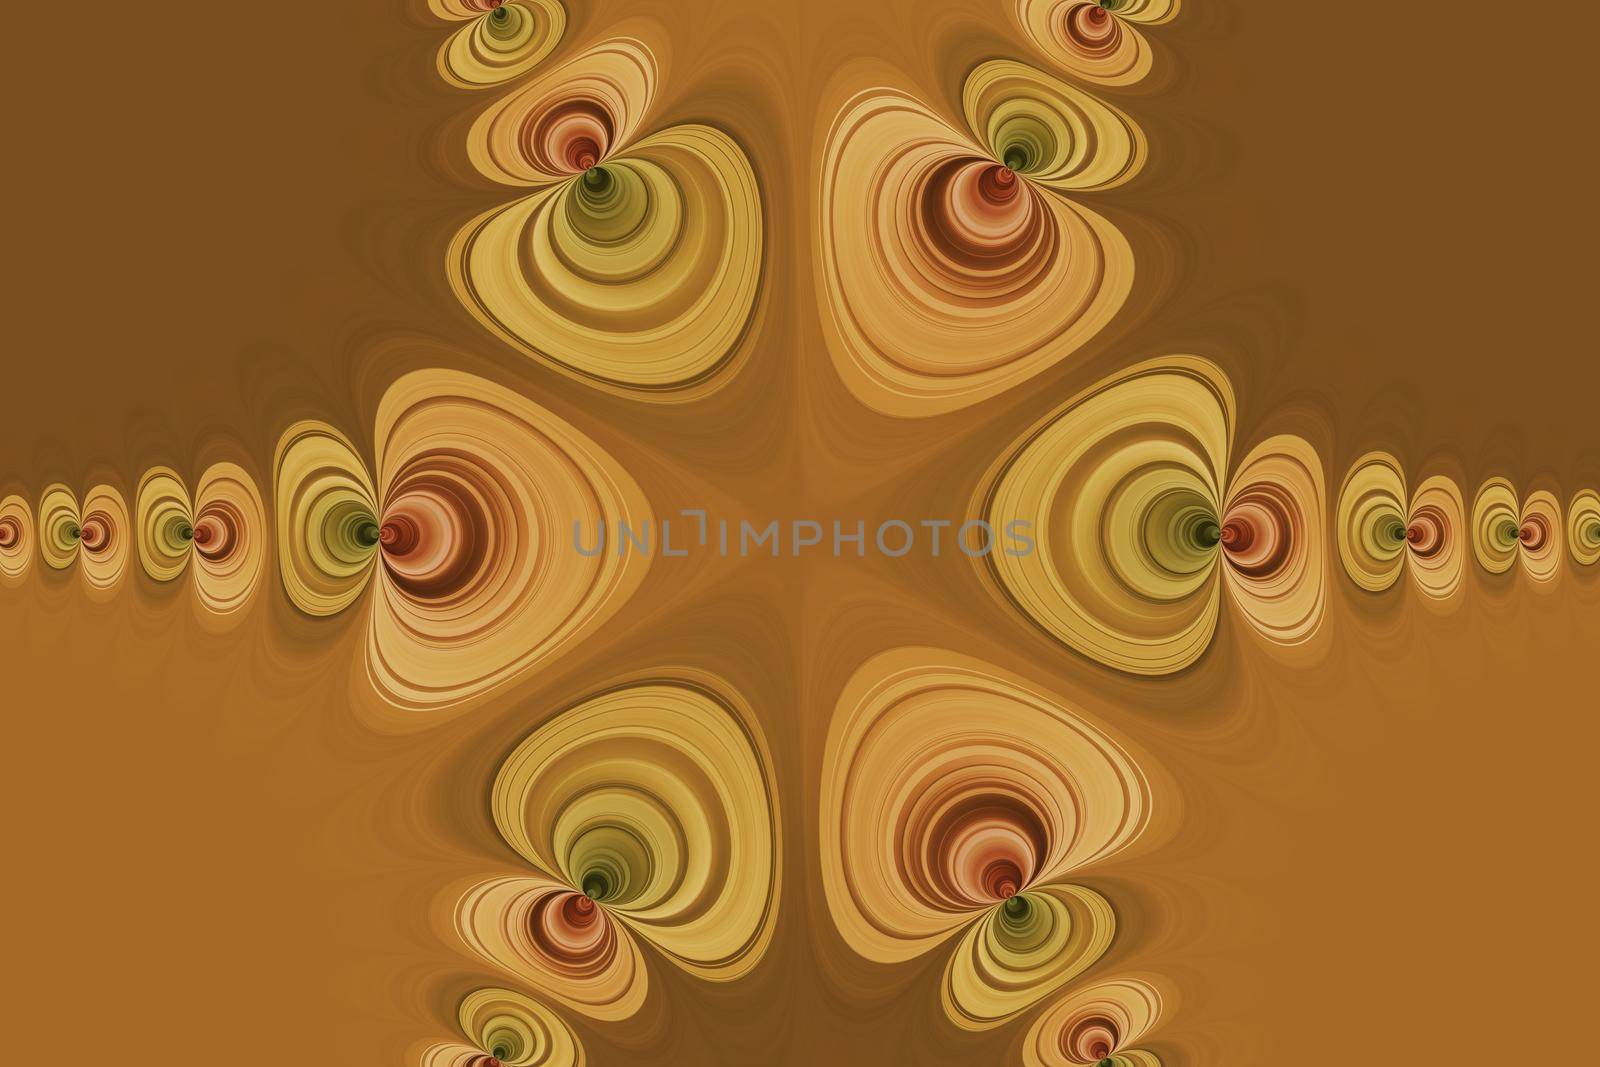 Big abstract yellow flower with green and red curved lines, kaleidoscopic effect, fantasy background